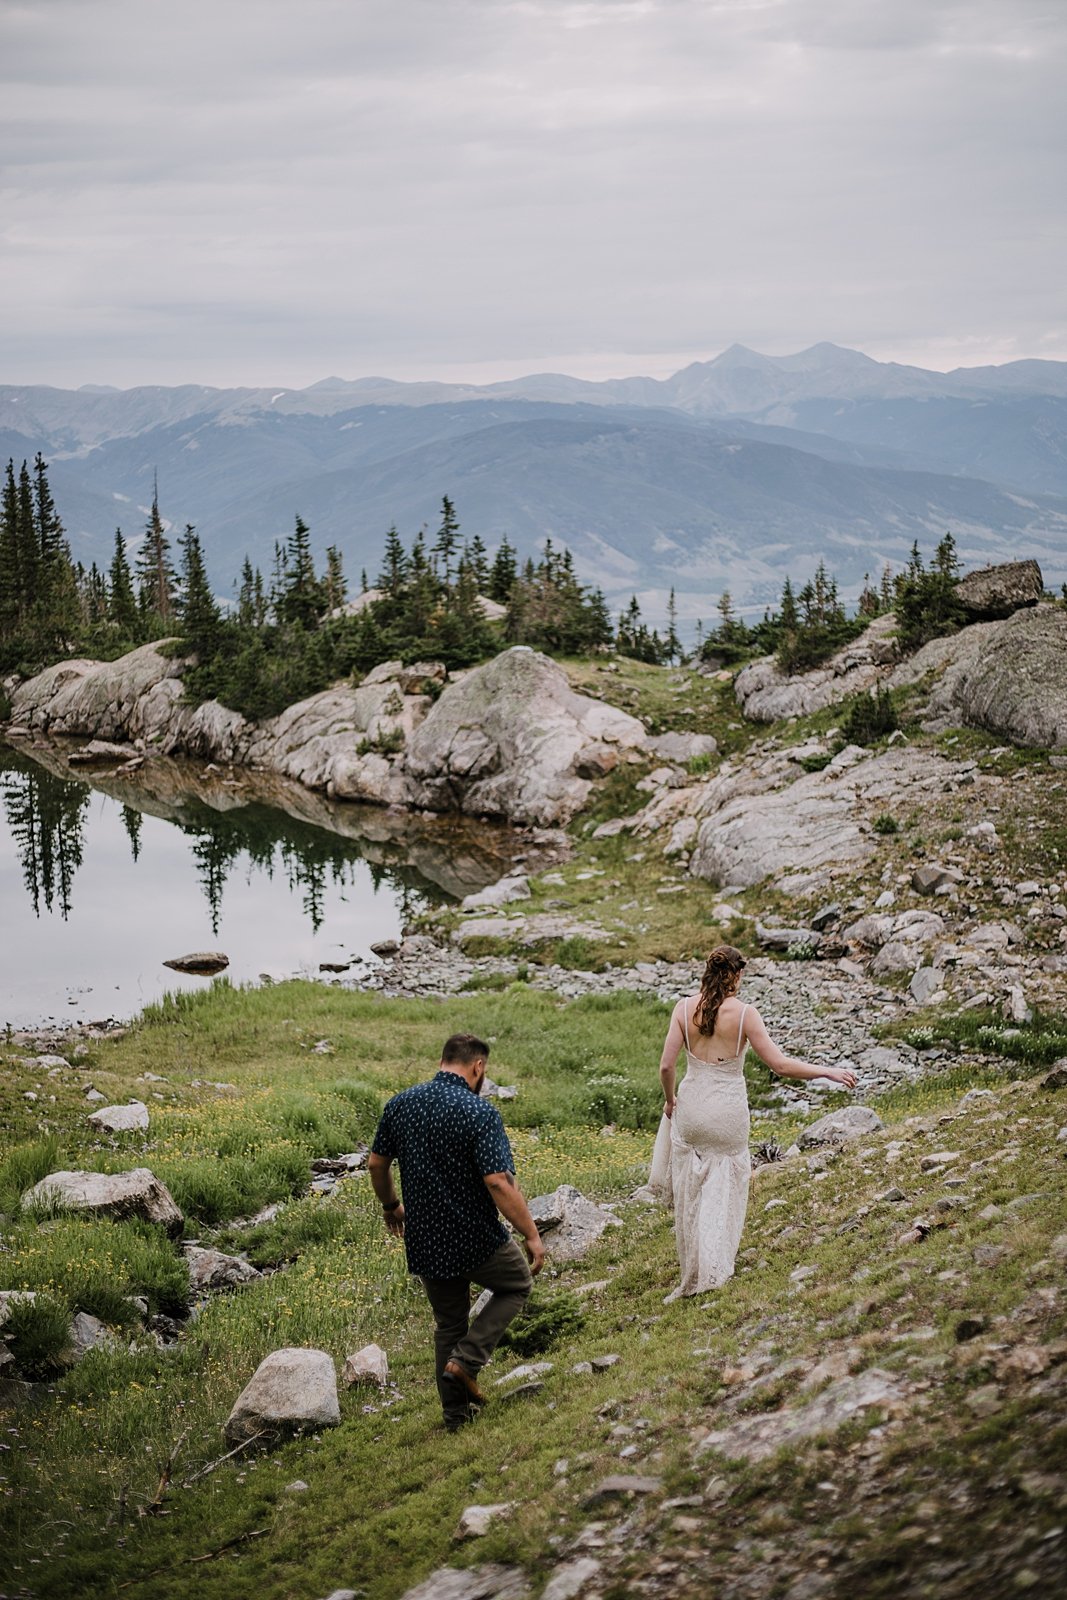 bride and groom hiking together, mohawk lakes elopement, crystal lakes elopement, summer mountain elopement, breckenridge wildflower elopement, colorado trail elopement, bride and groom hiking attire